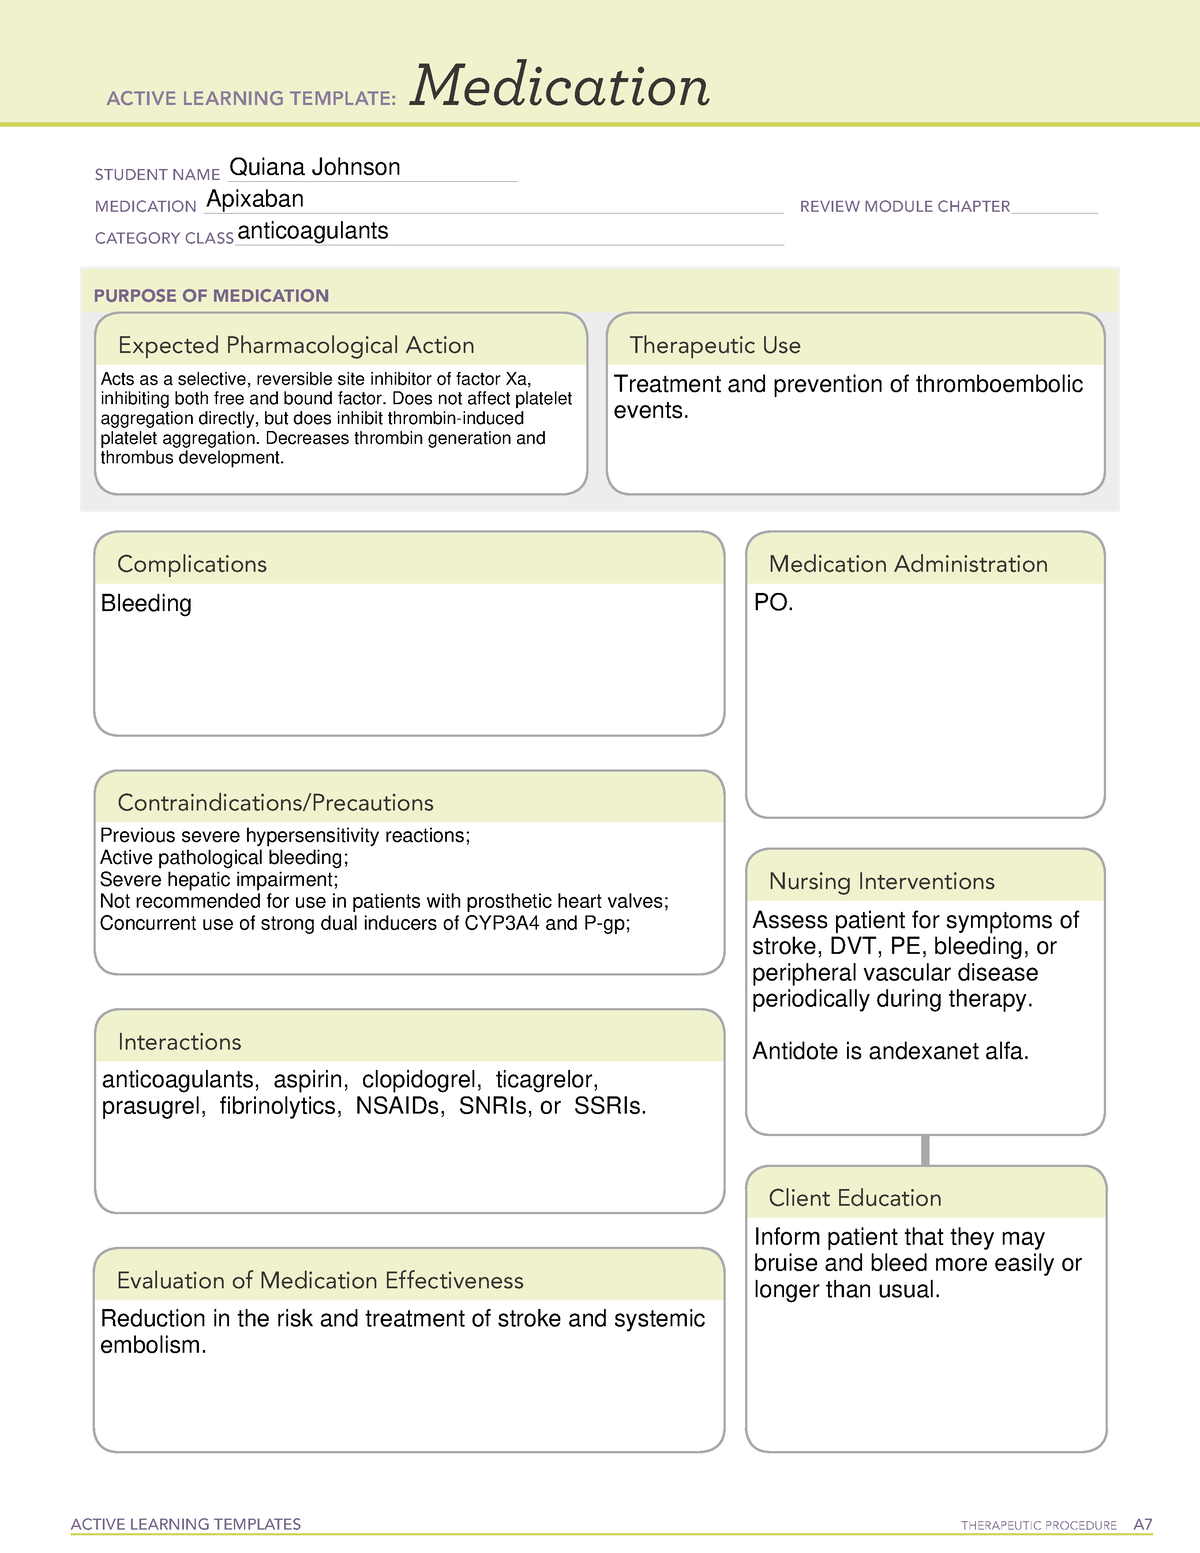 Apixaban drug card ACTIVE LEARNING TEMPLATES THERAPEUTIC PROCEDURE